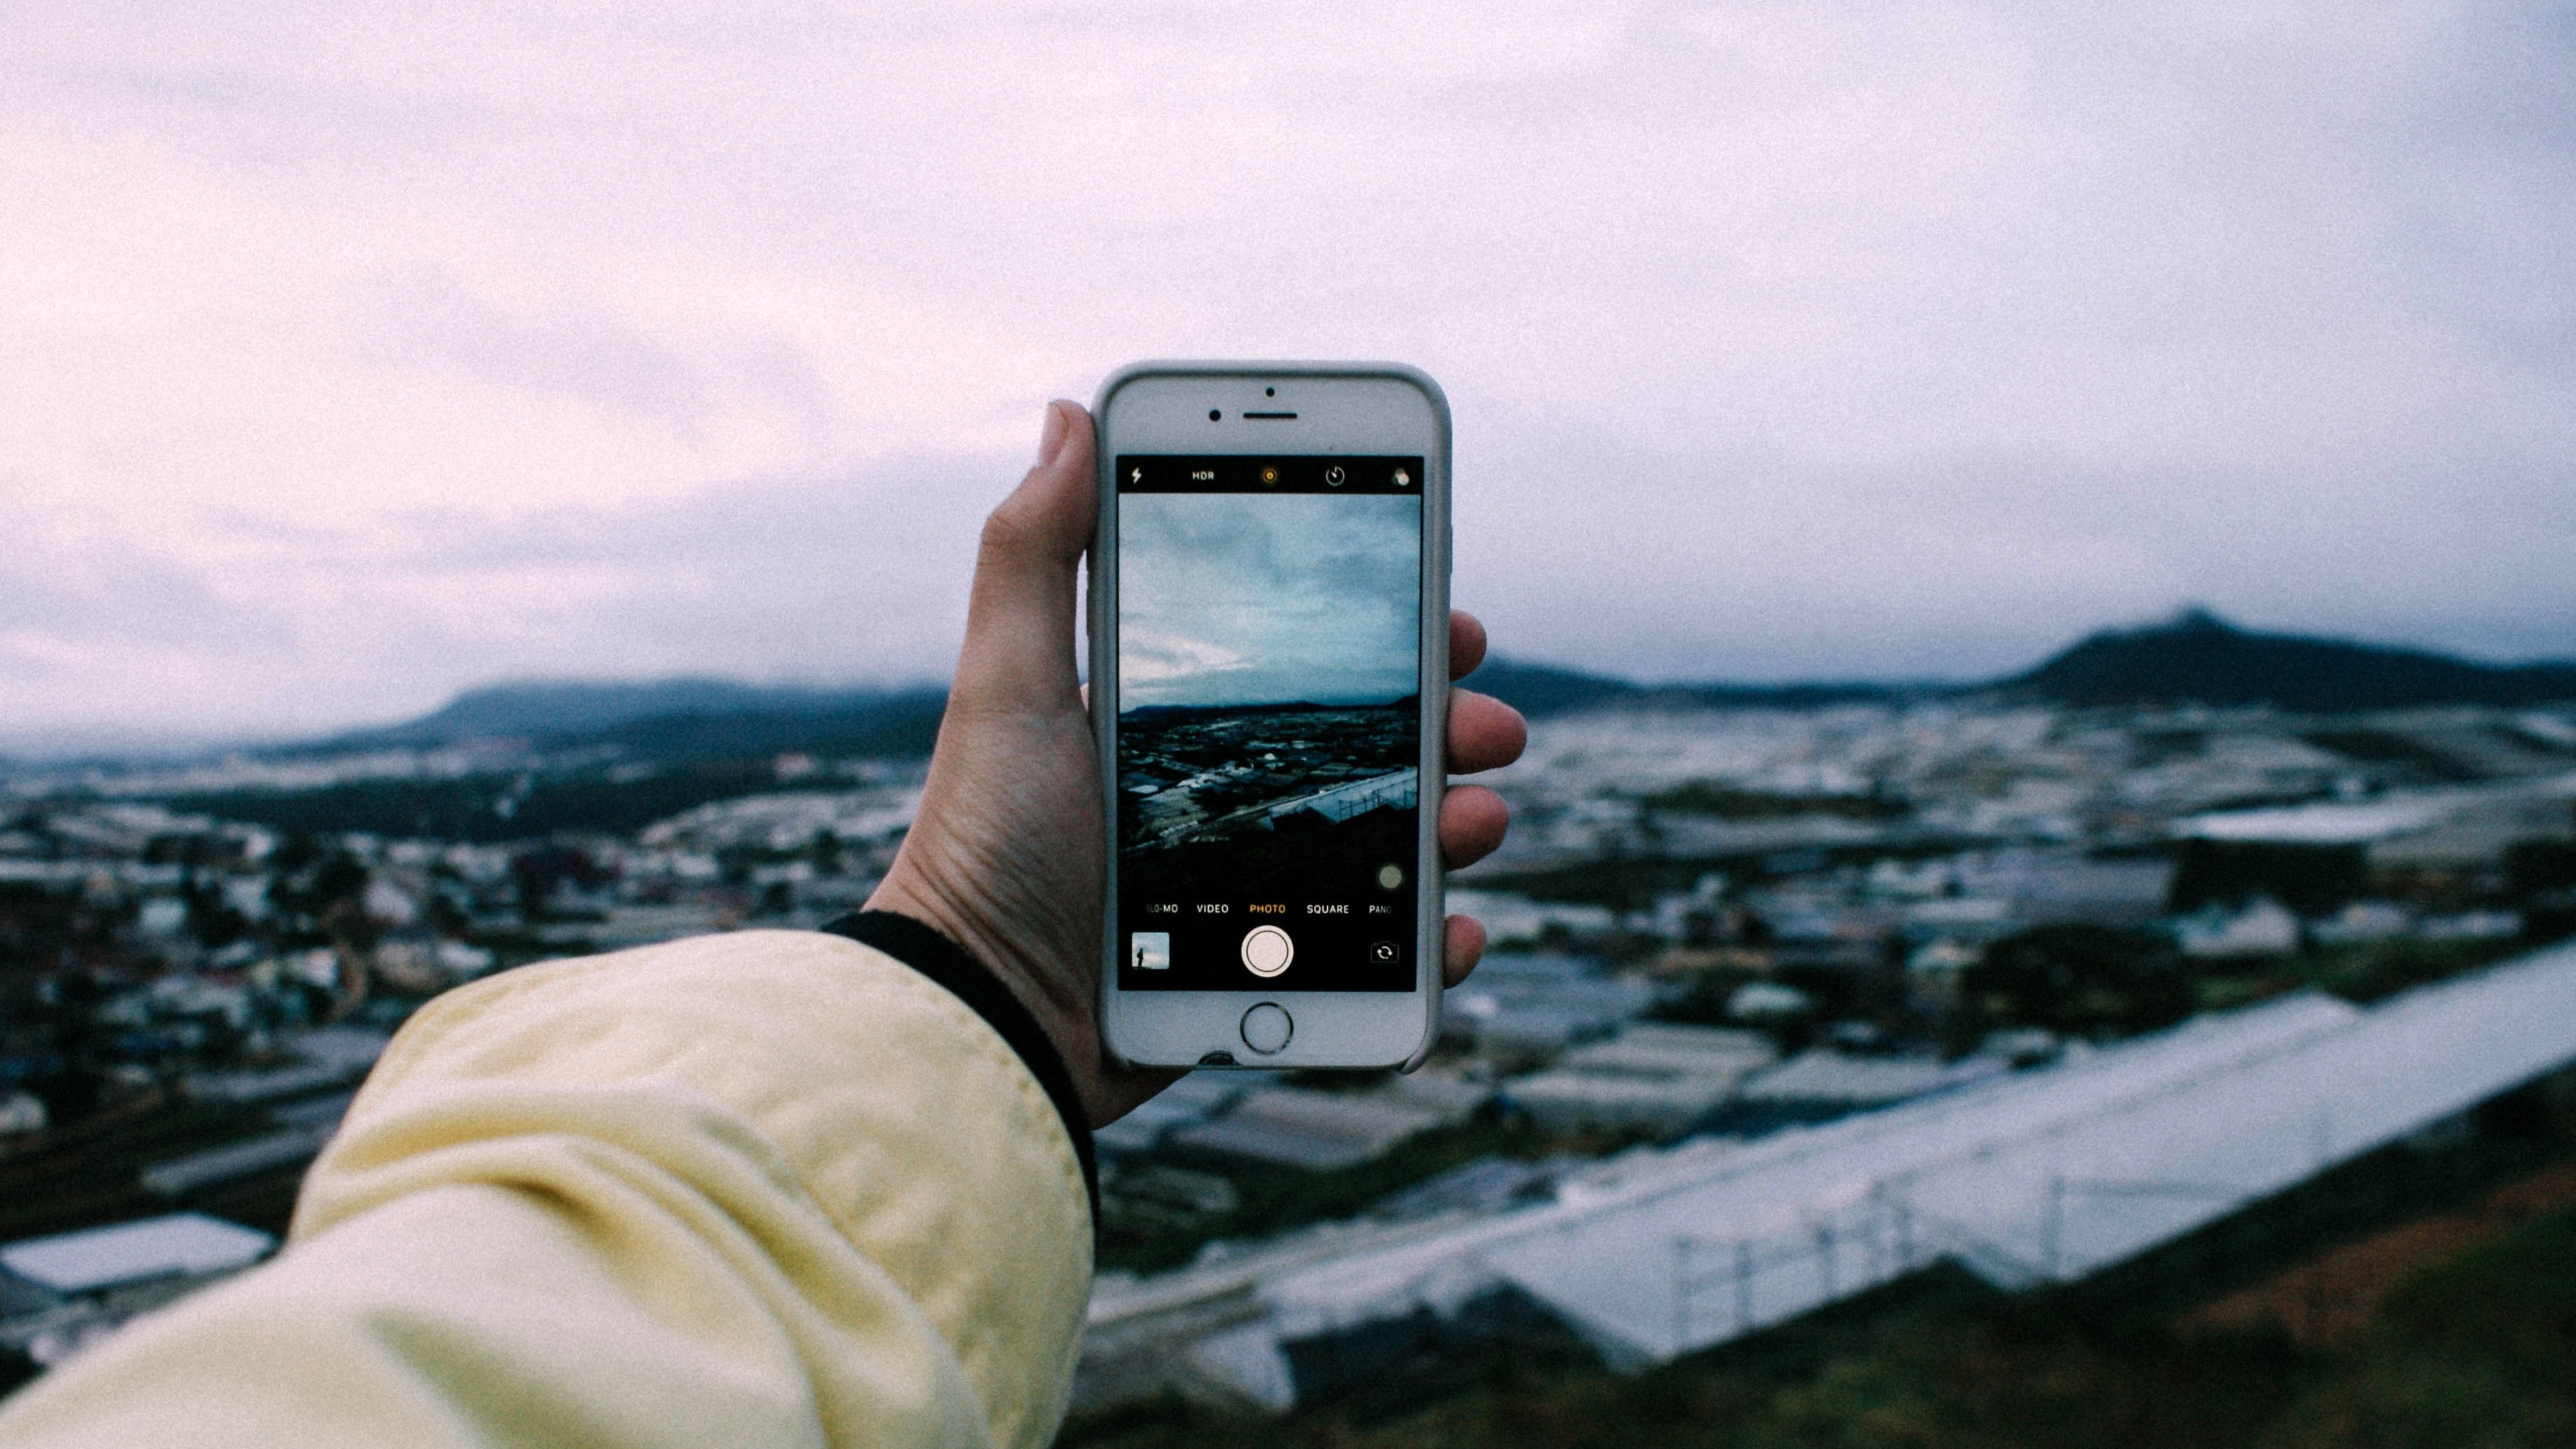 A person holds up a smartphone to take a picture of an urban landscape on an overcast day.